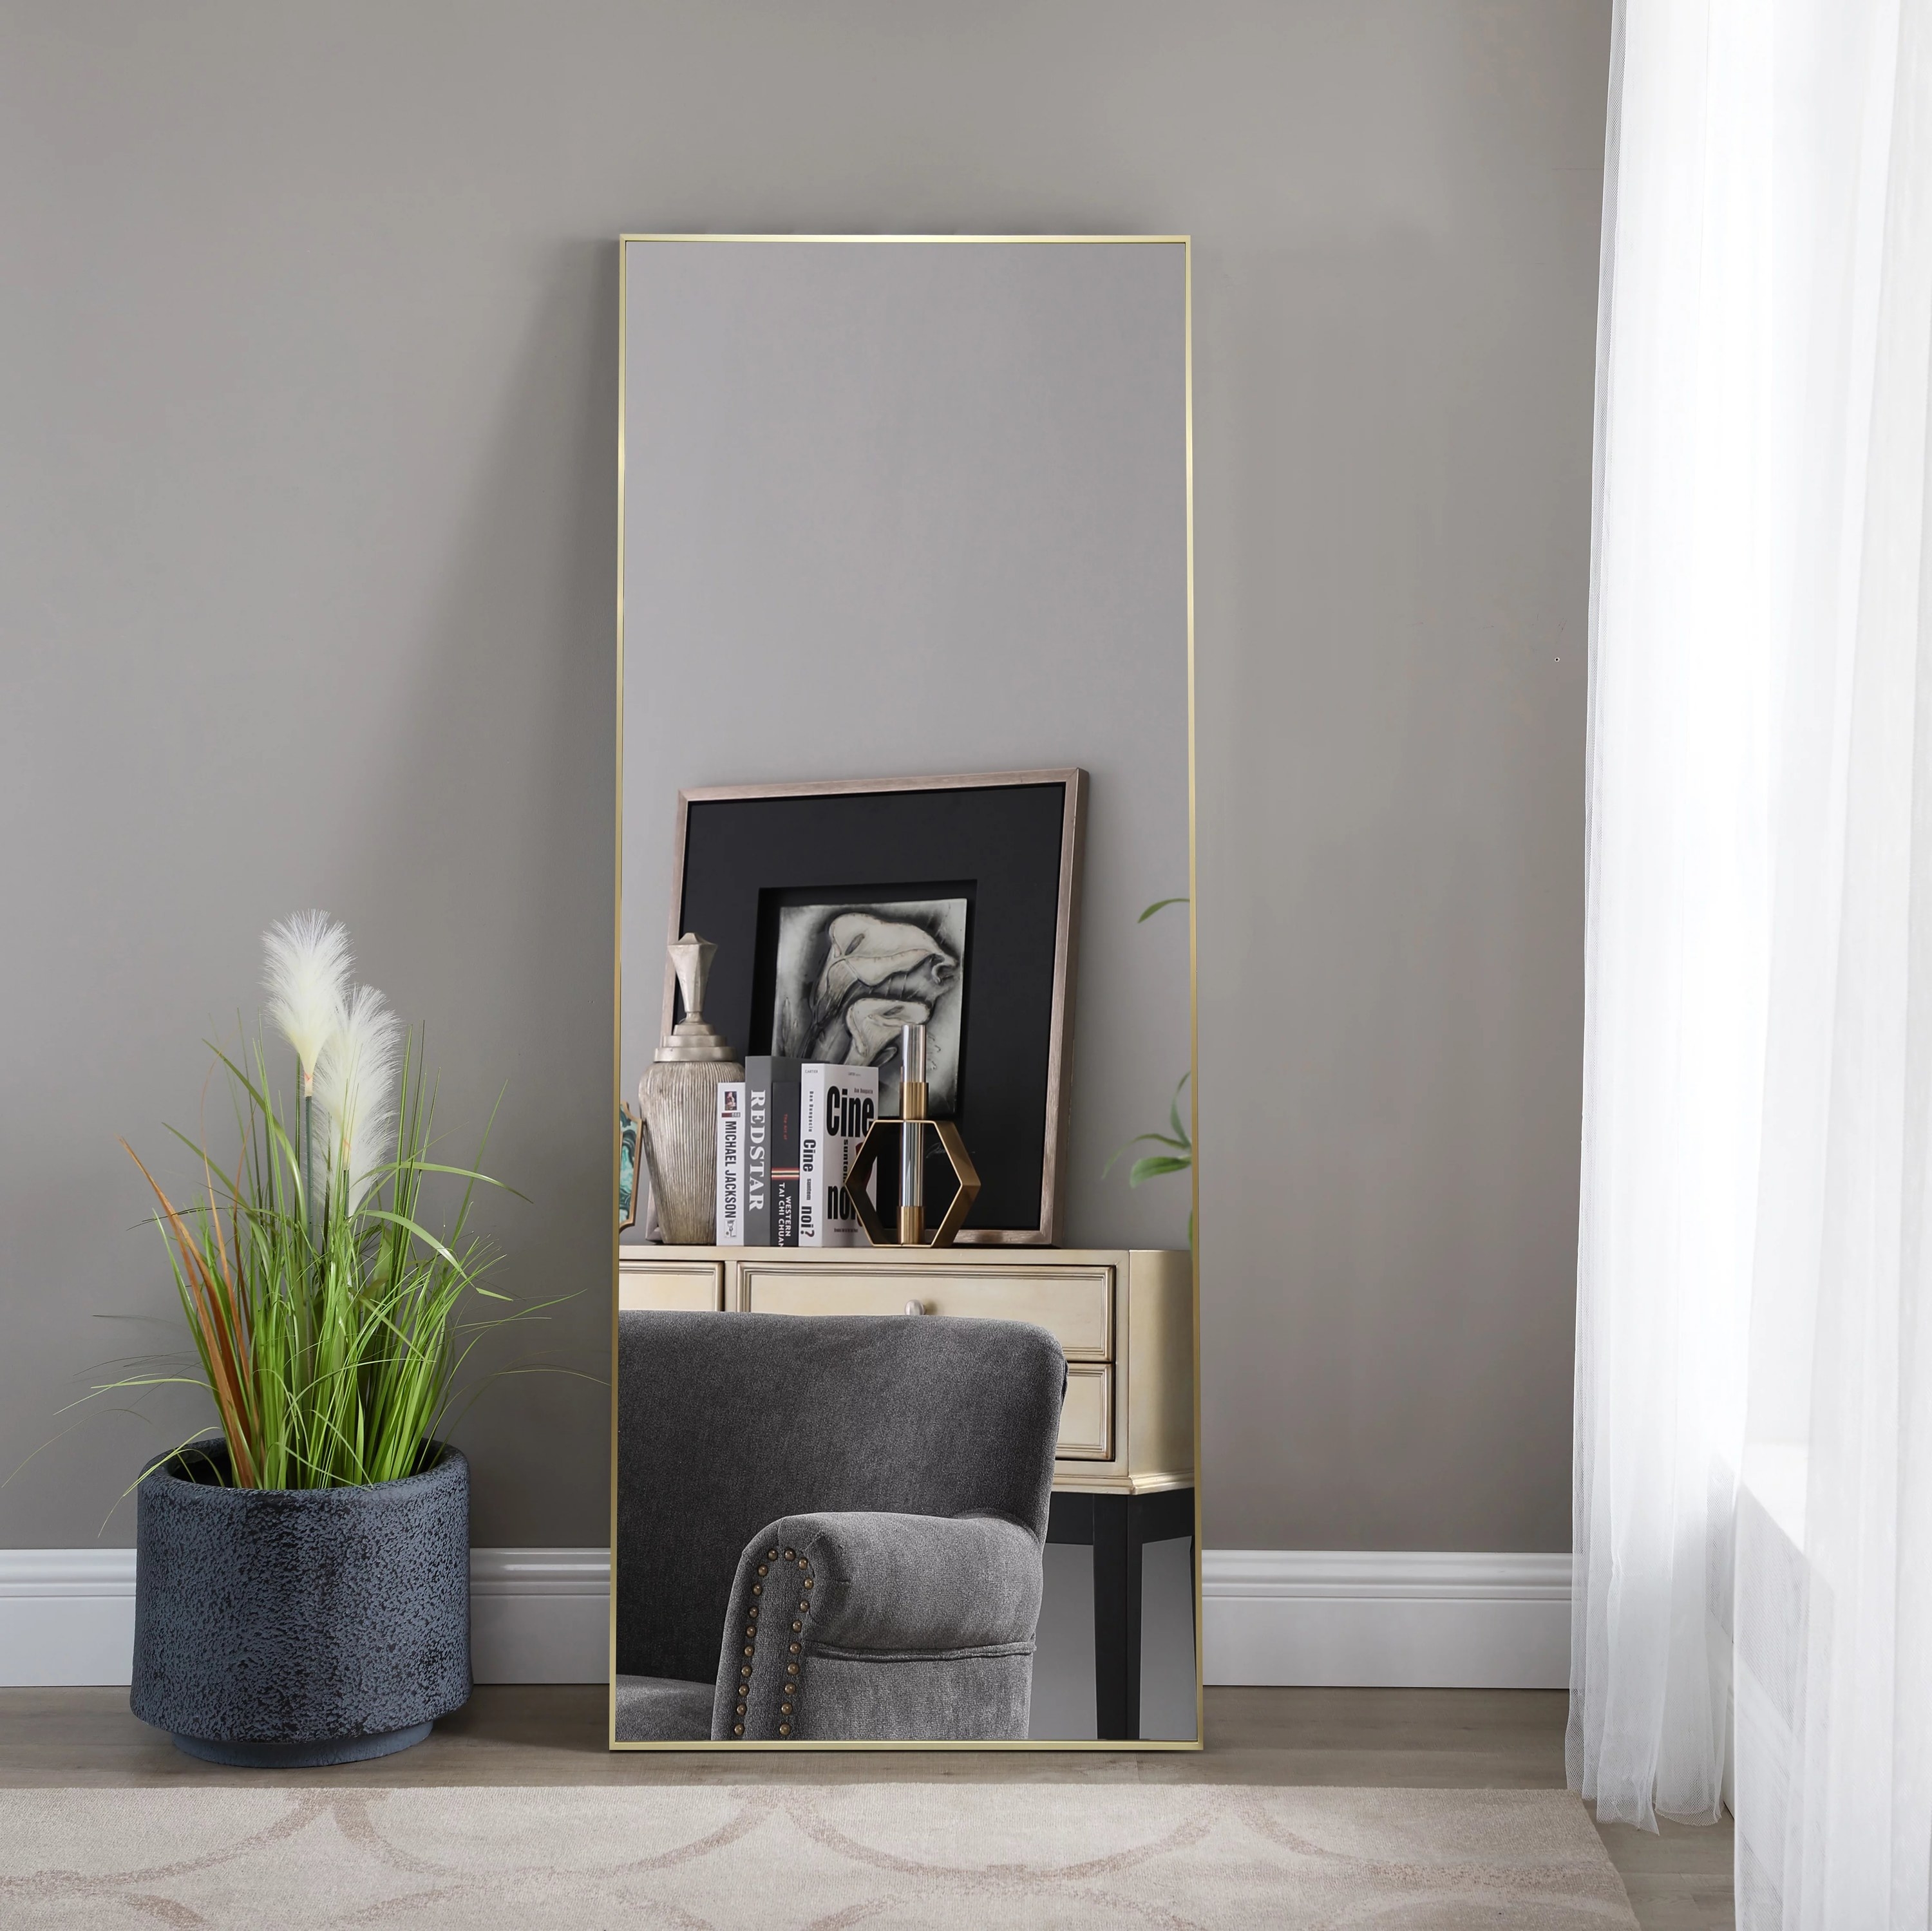 The standing mirror in gold next to a potted plant